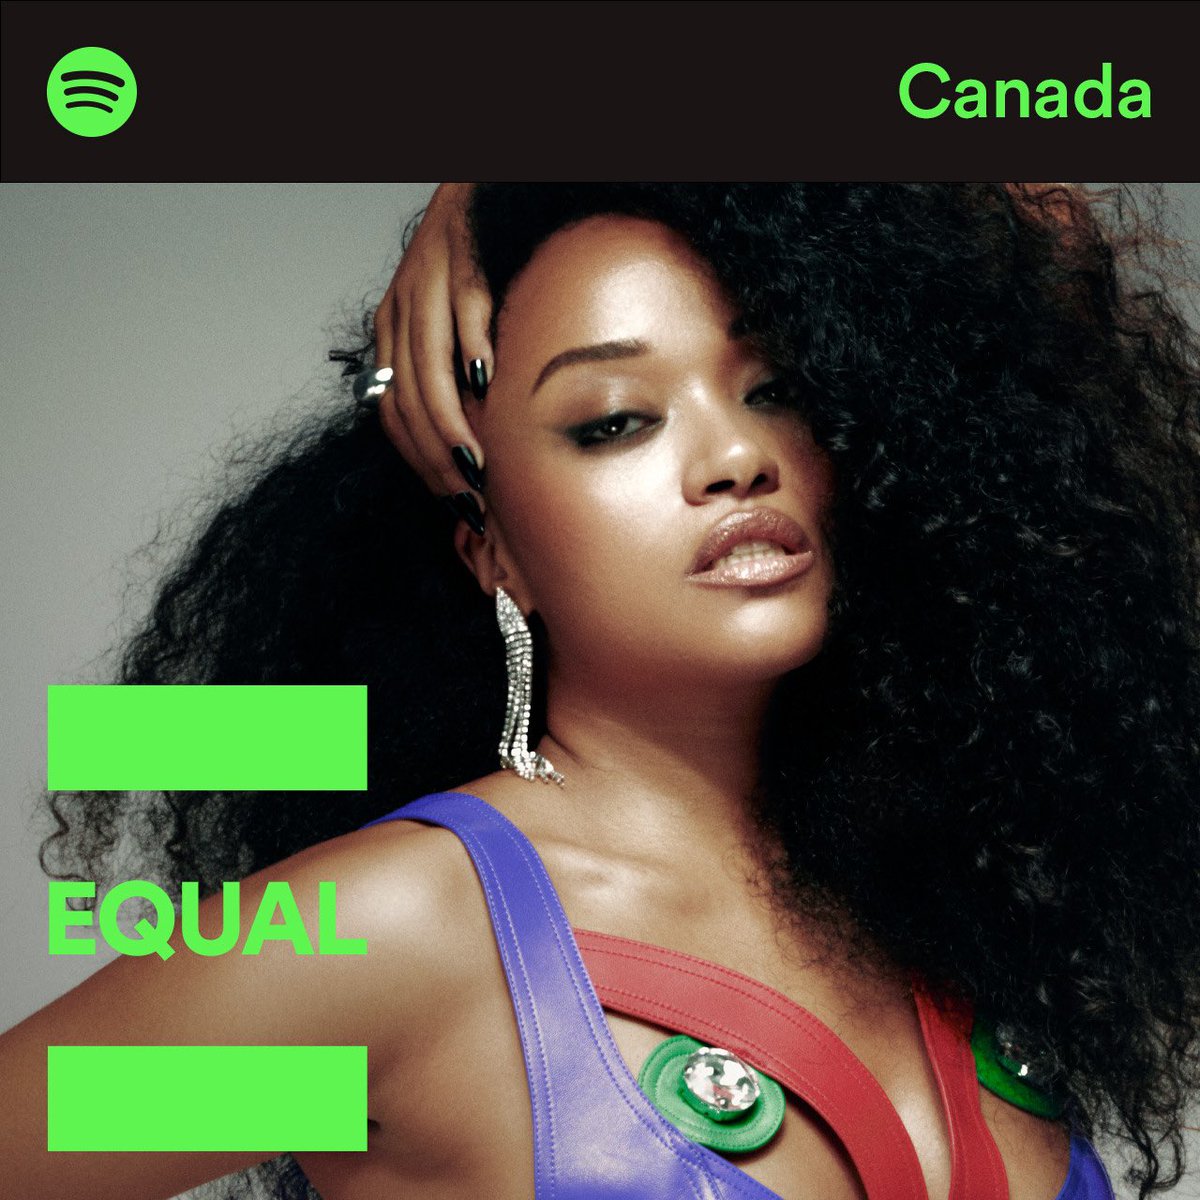 We are proud to announce @ShayLia_ as our EQUAL Ambassador for February. Listen to the EQUAL playlist for music that is powering movements for gender equality #SpotifyEqual. spotify.link/9etYvYCdfHb